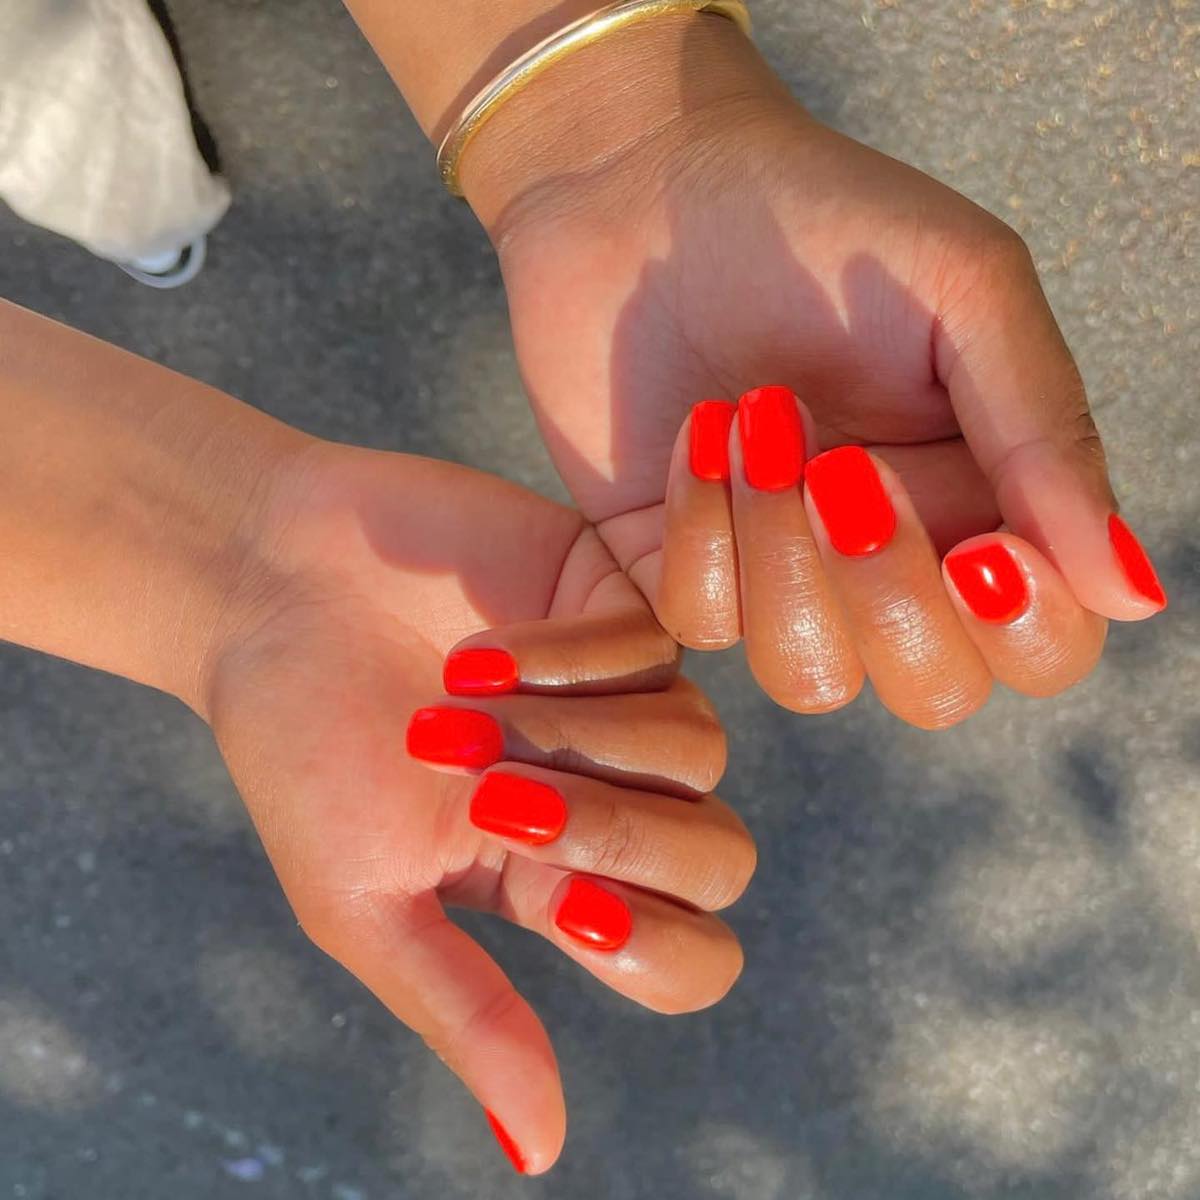 According to Experts, These Are the 8 Mood-Boosting Nail Colours Everyone Will Be Asking for This Summer